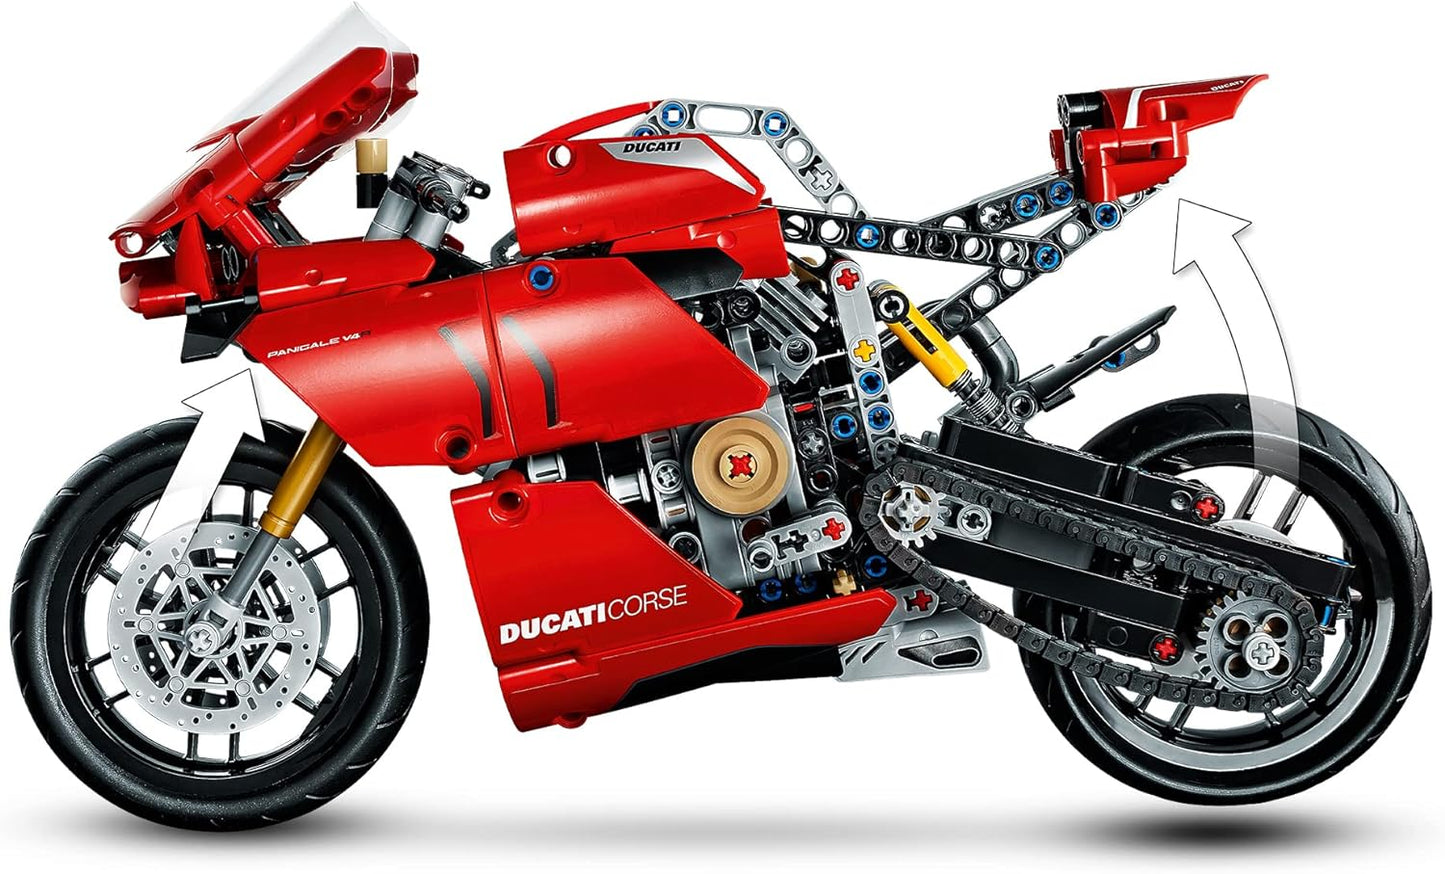 LEGO 42107 Technic Ducati Panigale V4 R Motorbike, Collectible Superbike Display Model Building Kit with Gearbox and Working Suspension, Gift Idea, 10 year +